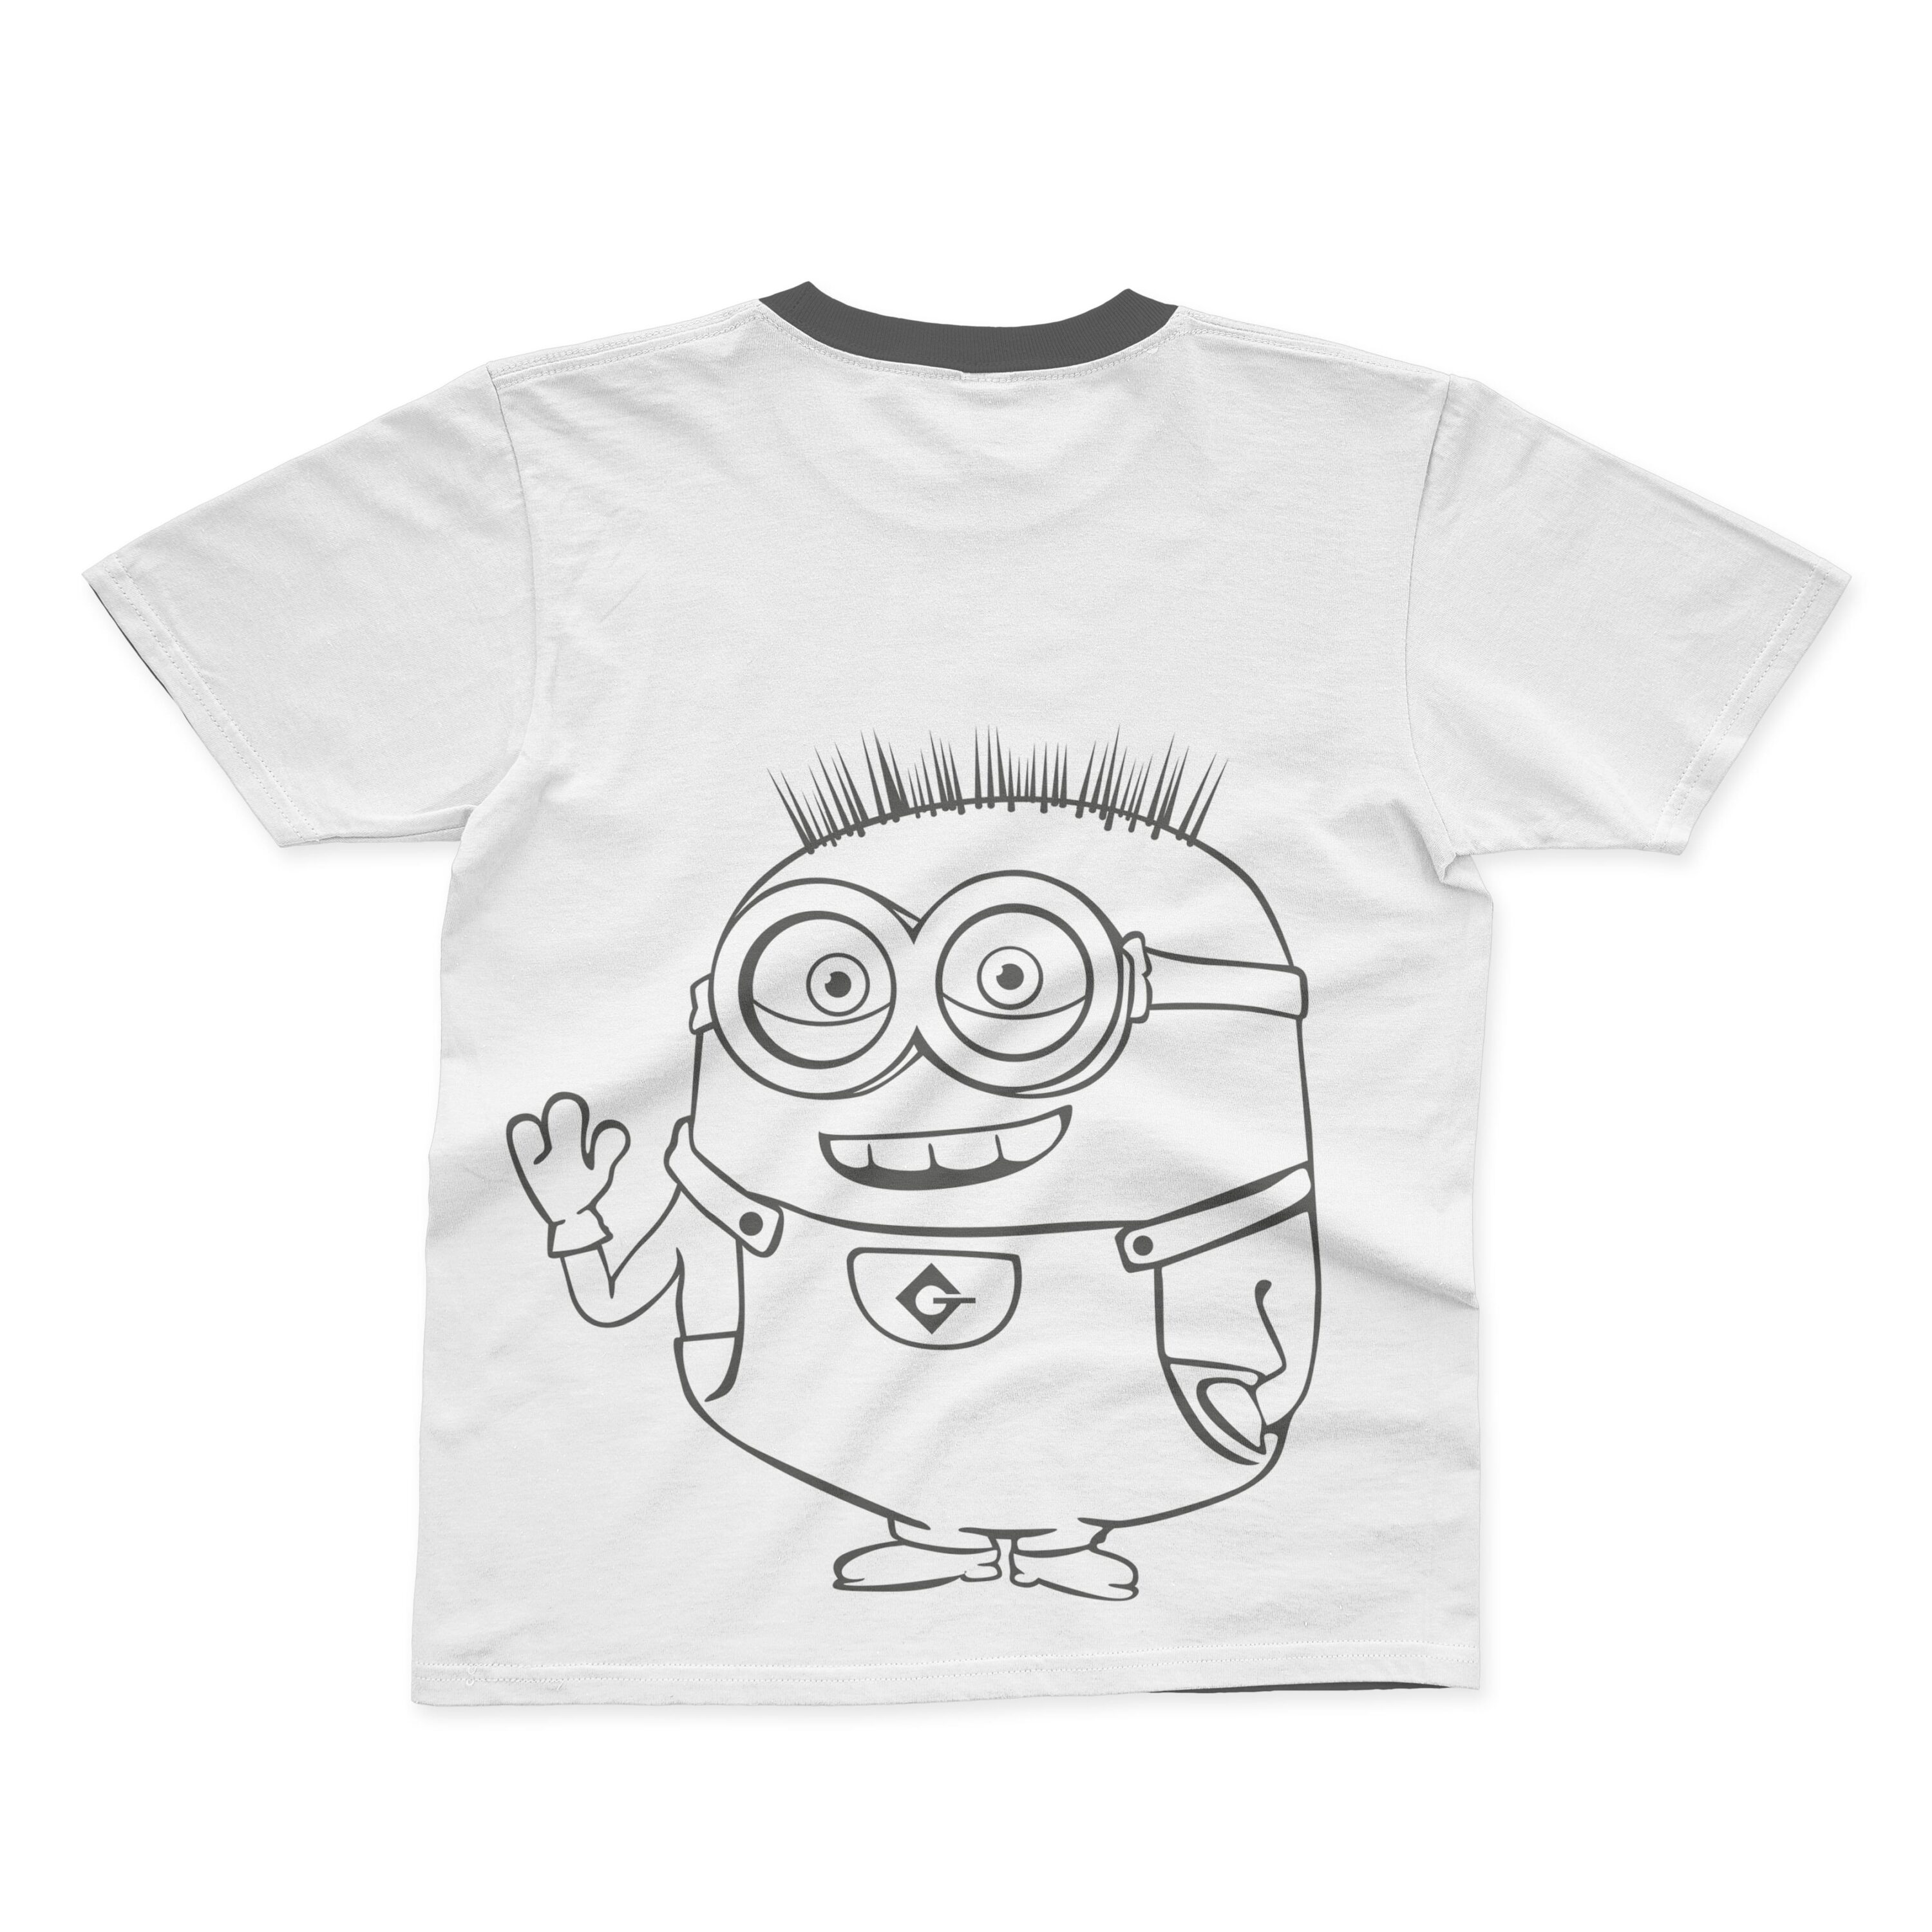 A white T-shirt with a black collar and an outline of a smiling minion.